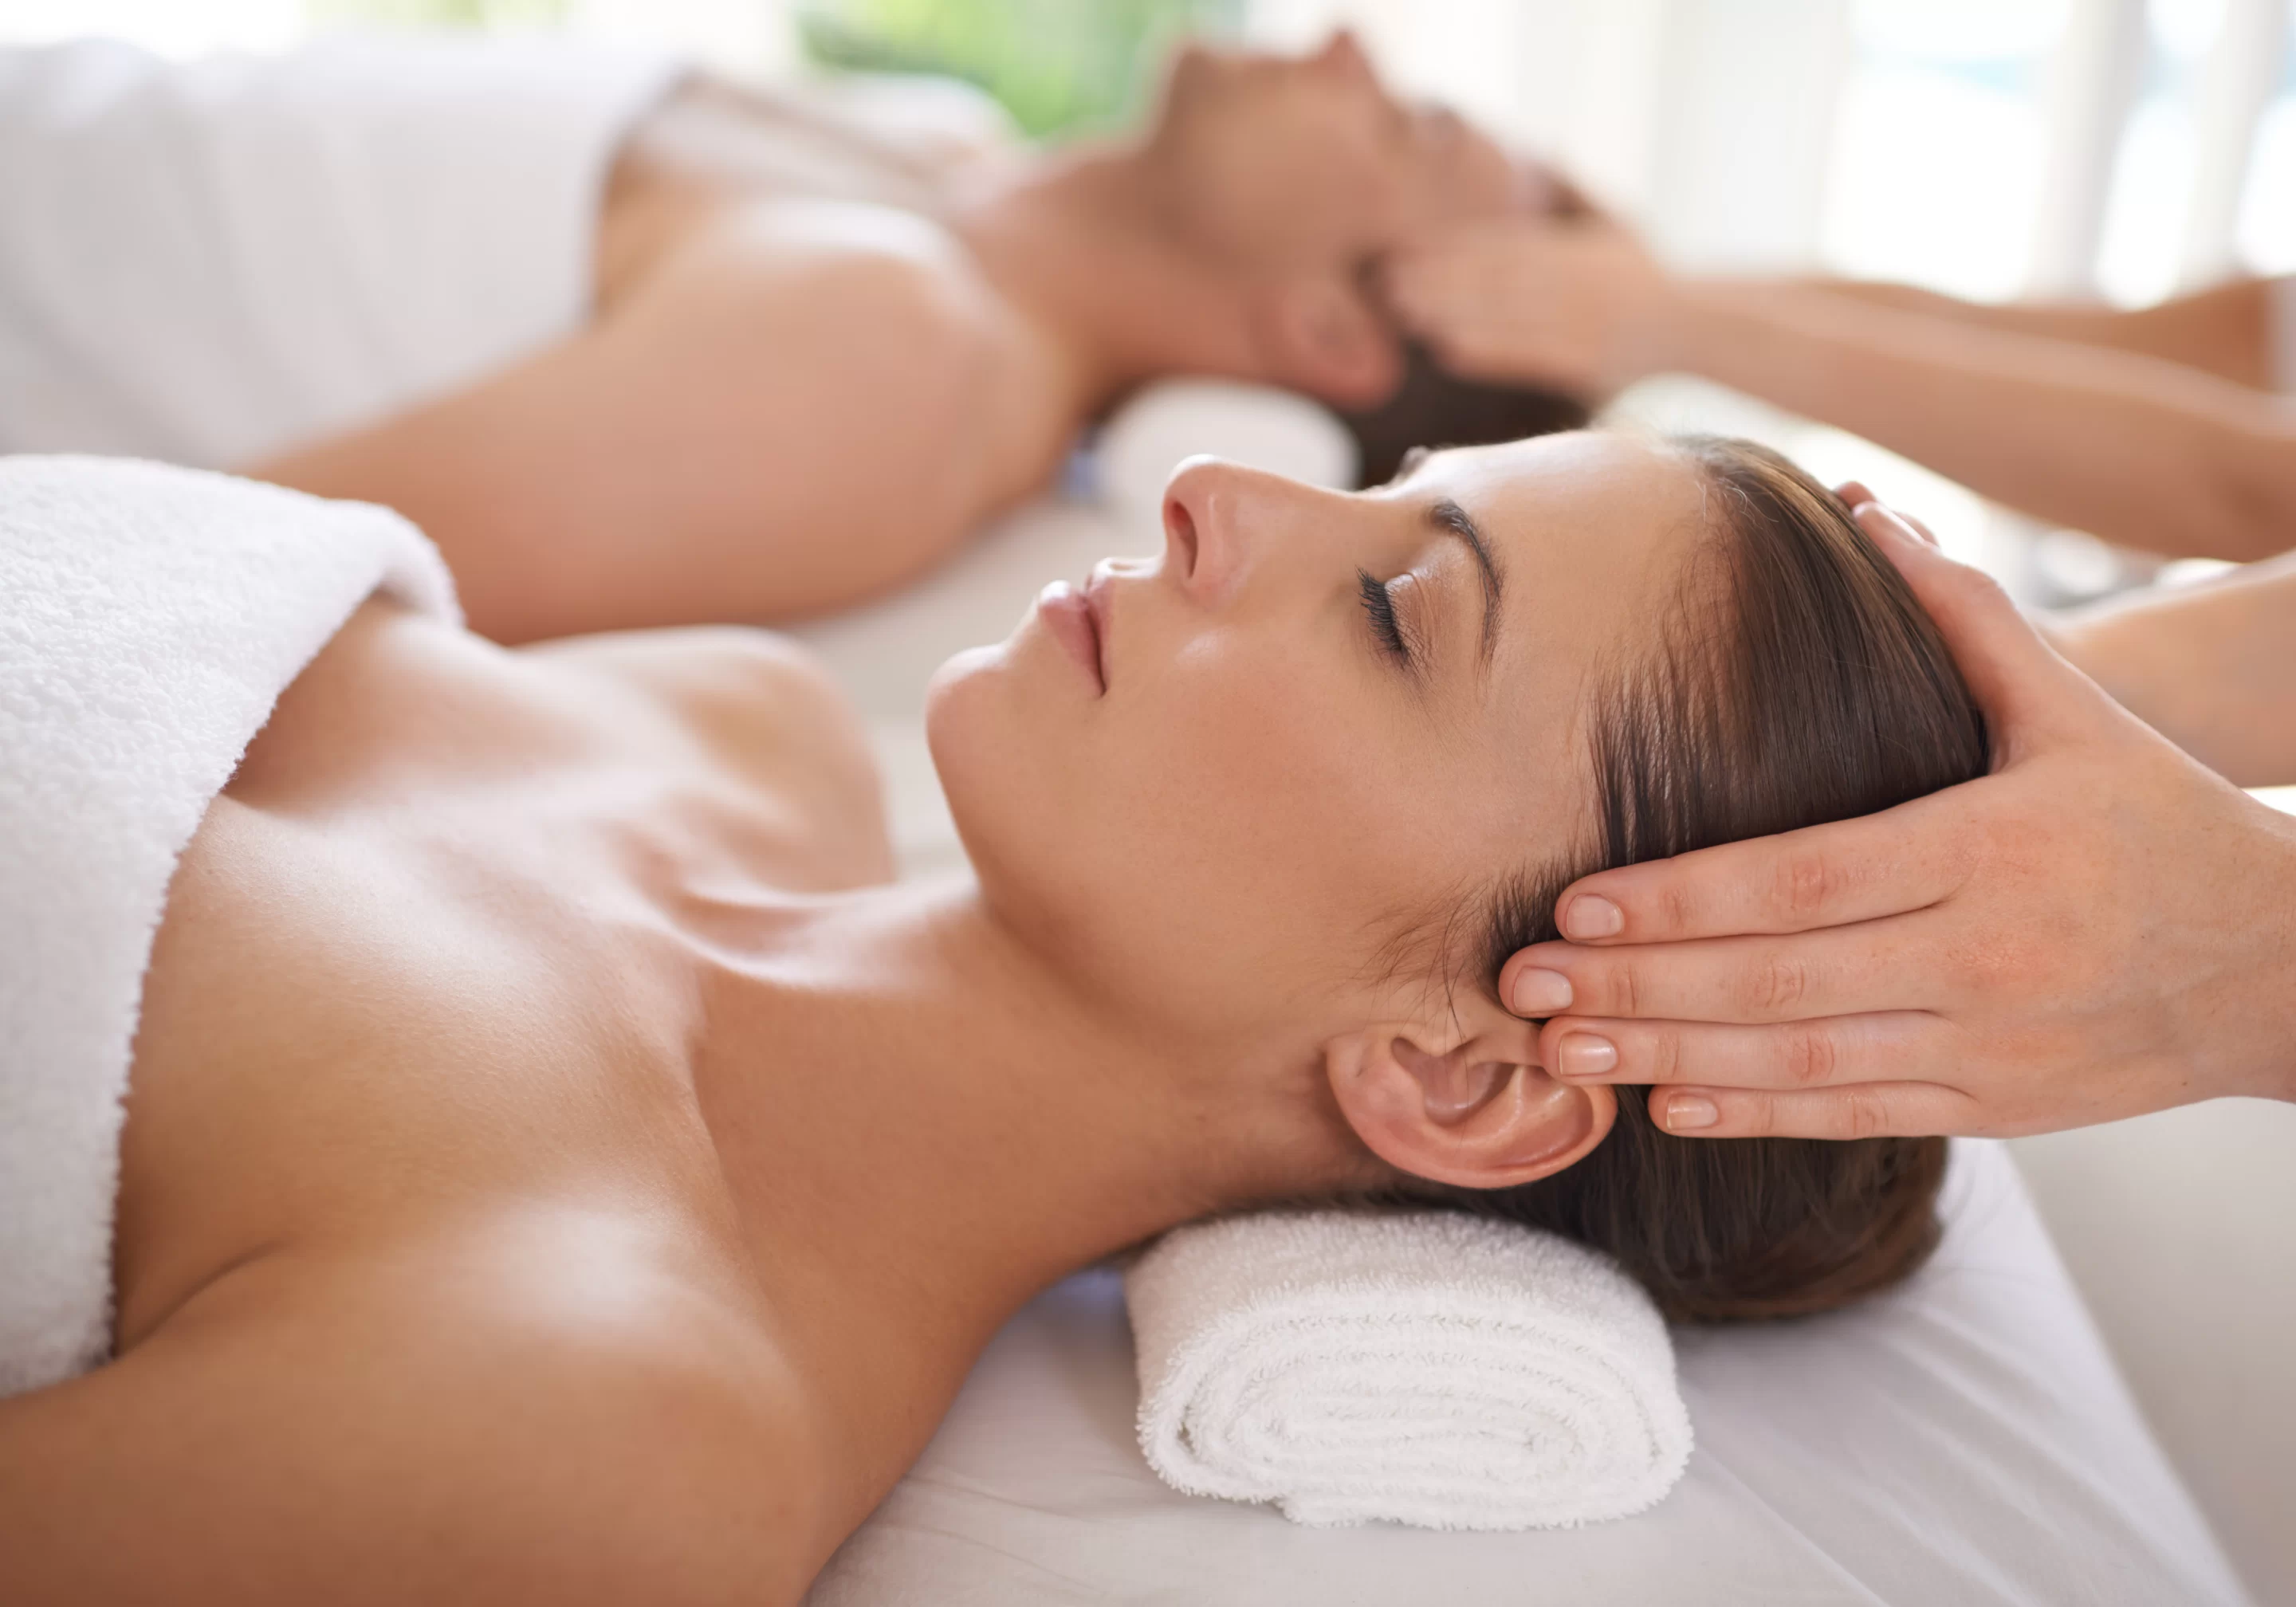 Feel refreshed and rejuvenated after getting a specialized massage at Las Catalinas.